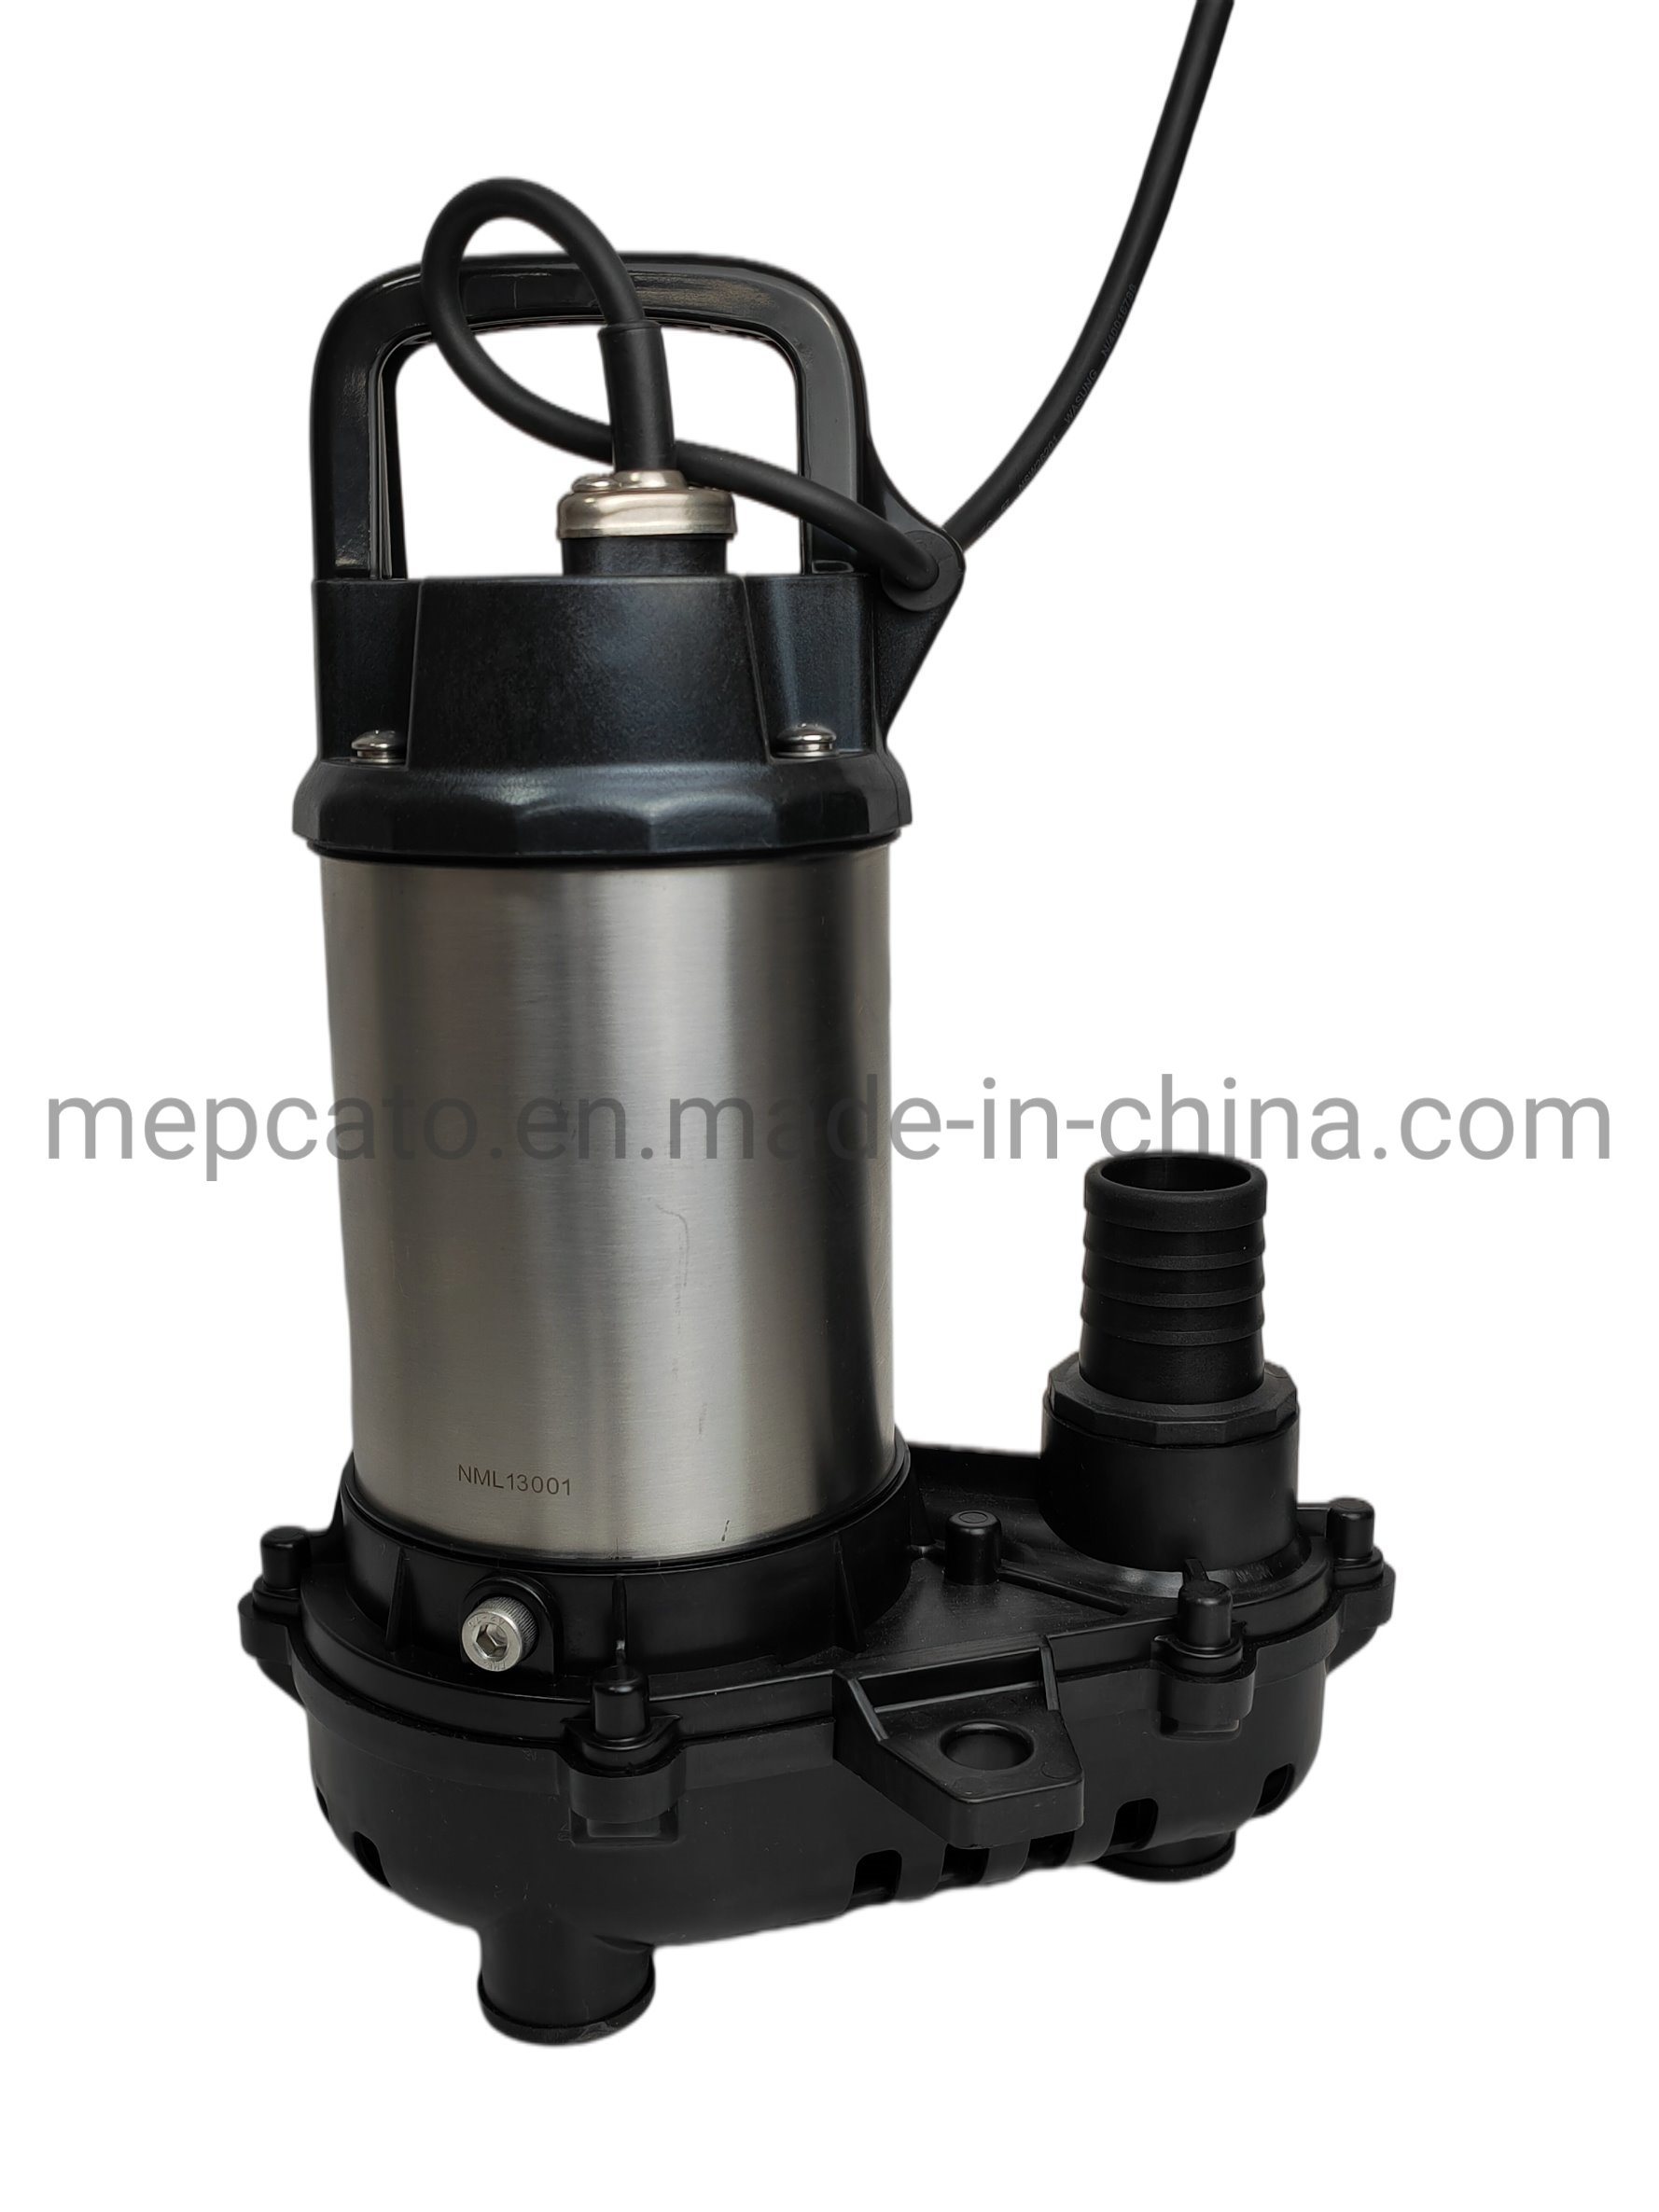 Sea Water Drainage Stainless Steel Electric Submersible Centrifugal Water Supply Pump with Floater for Fishponds Swimming Pools